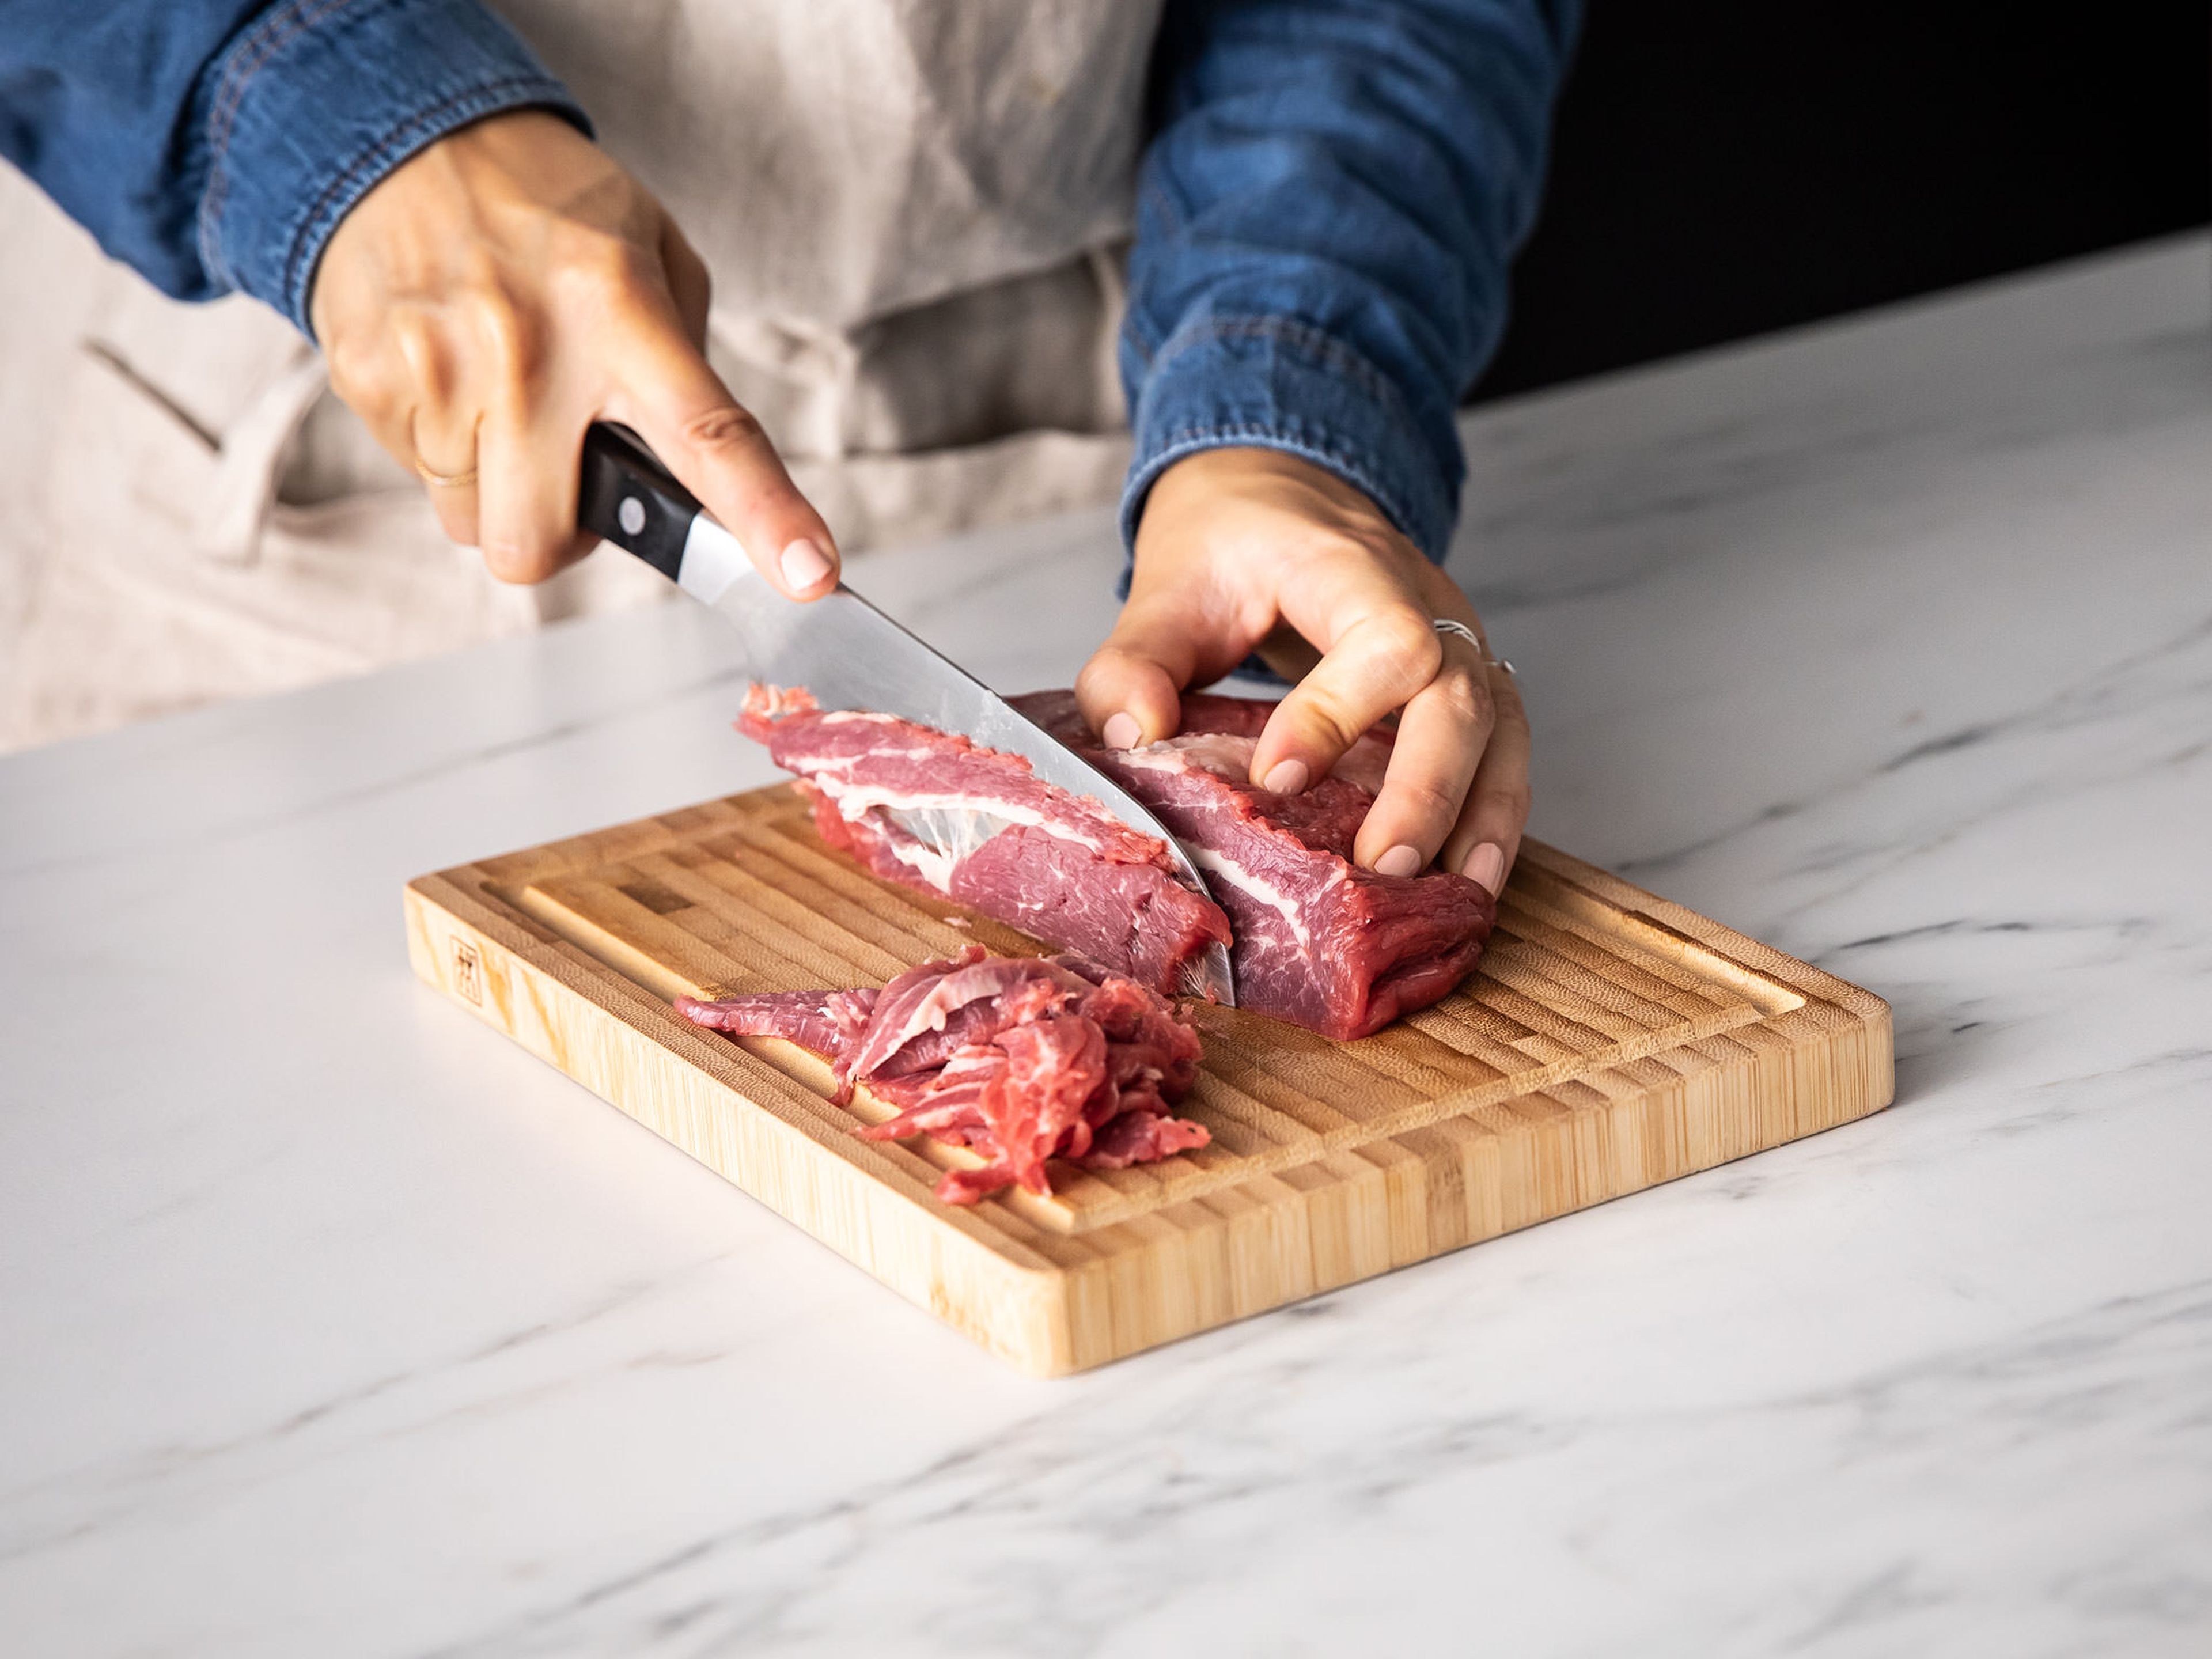 Transfer the meat to a cutting board and freeze for approx. 20 min. In the meantime, peel the onions, core the bell peppers, and thinly slice them both. Then slice the meat as thinly as you can.